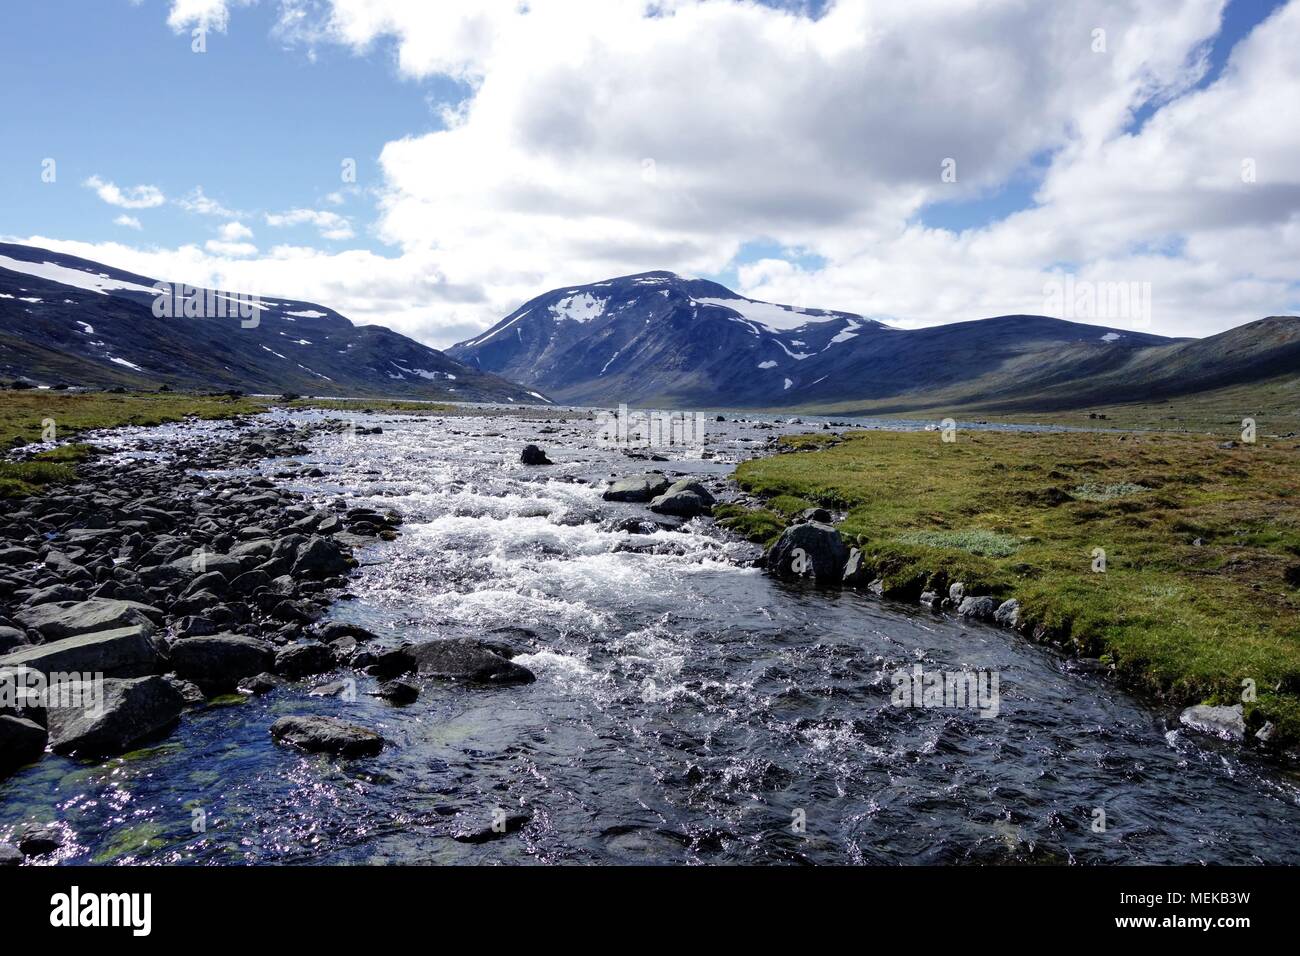 Wild nature, mountains and lake in National park Jotunheimen Norway Stock Photo